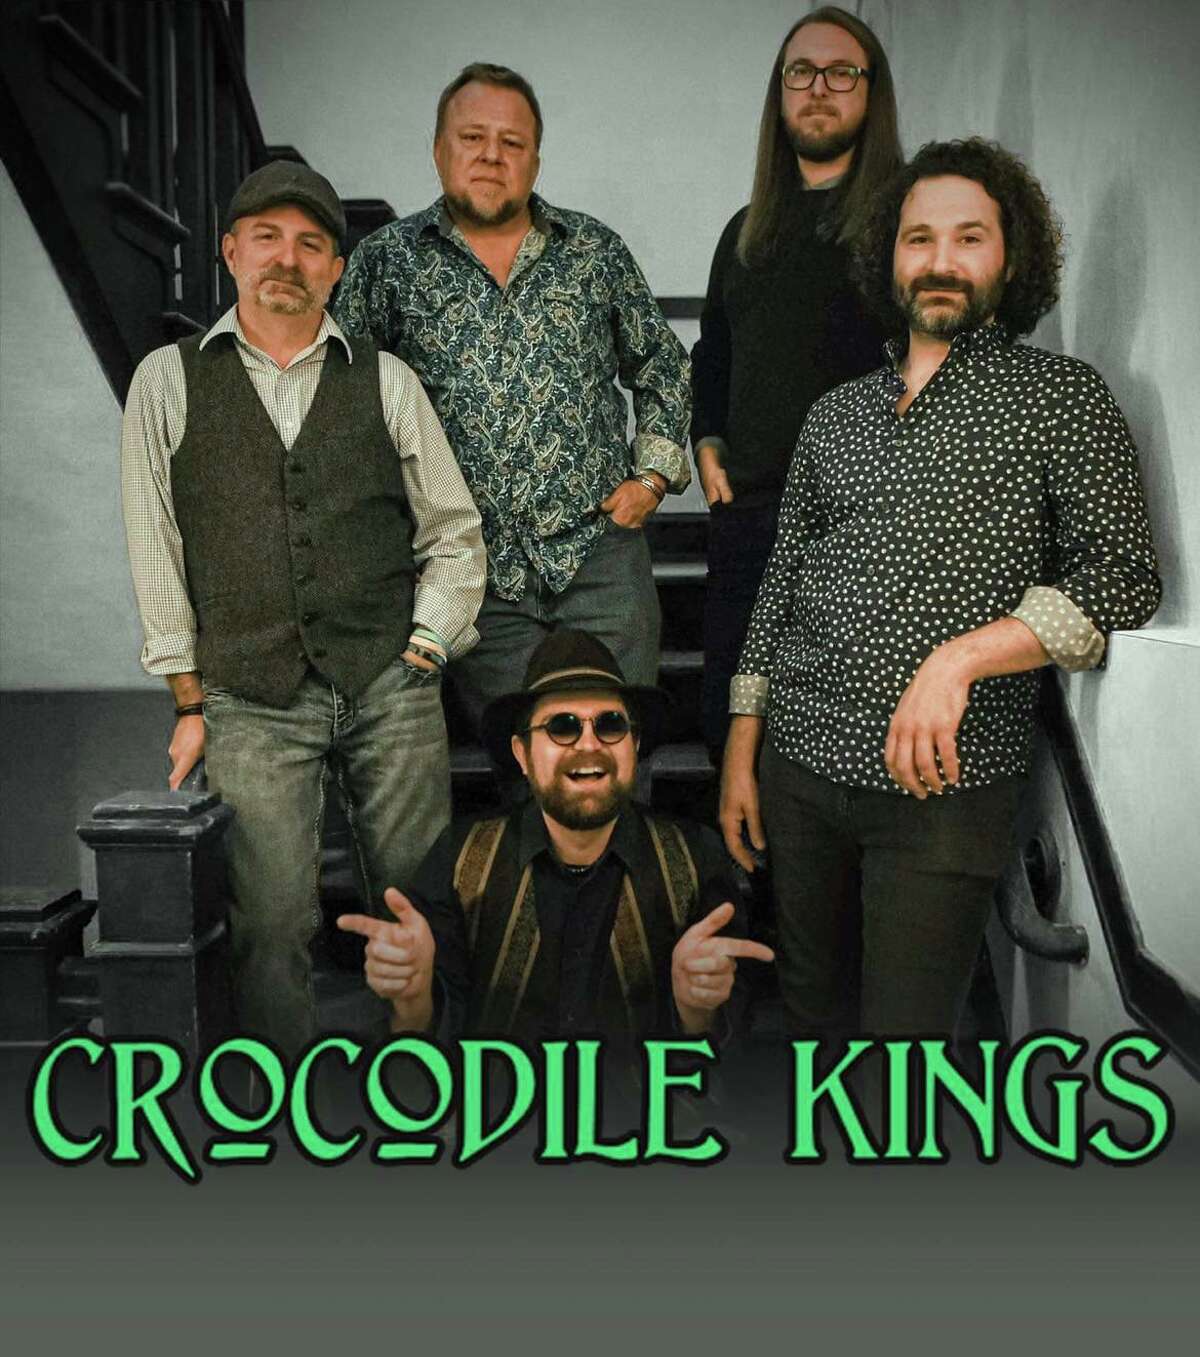 The Crocodile Kings will perform at the Alton Night Market at Jacoby Arts Center, 627 E. Broadway, from 7-10 p.m. Thursday, June 30.